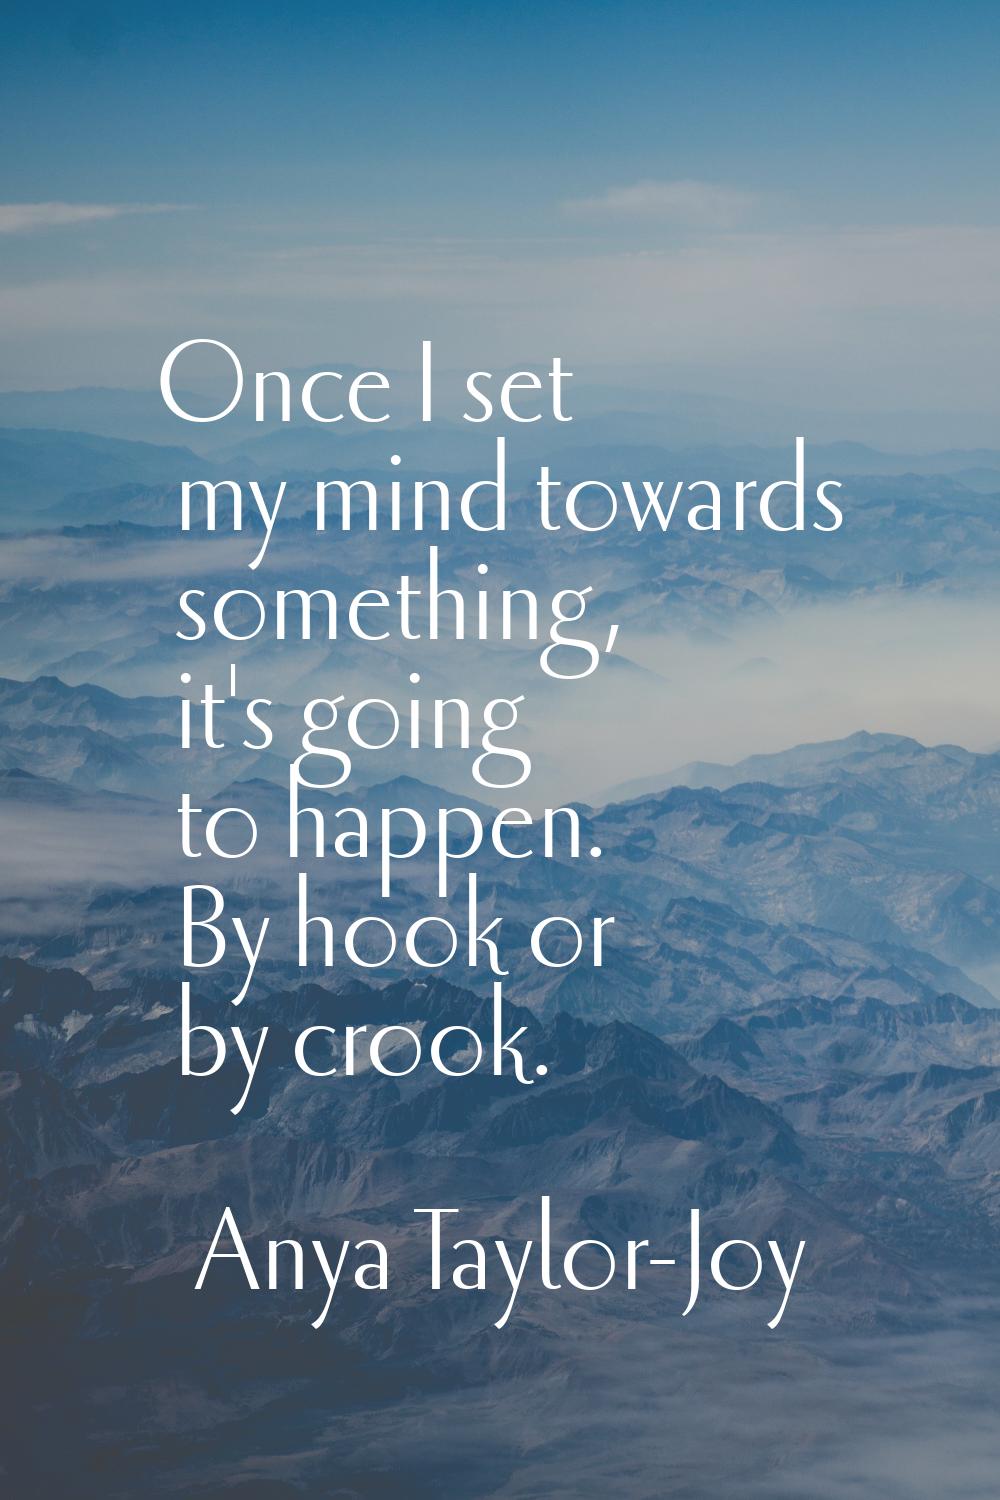 Once I set my mind towards something, it's going to happen. By hook or by crook.